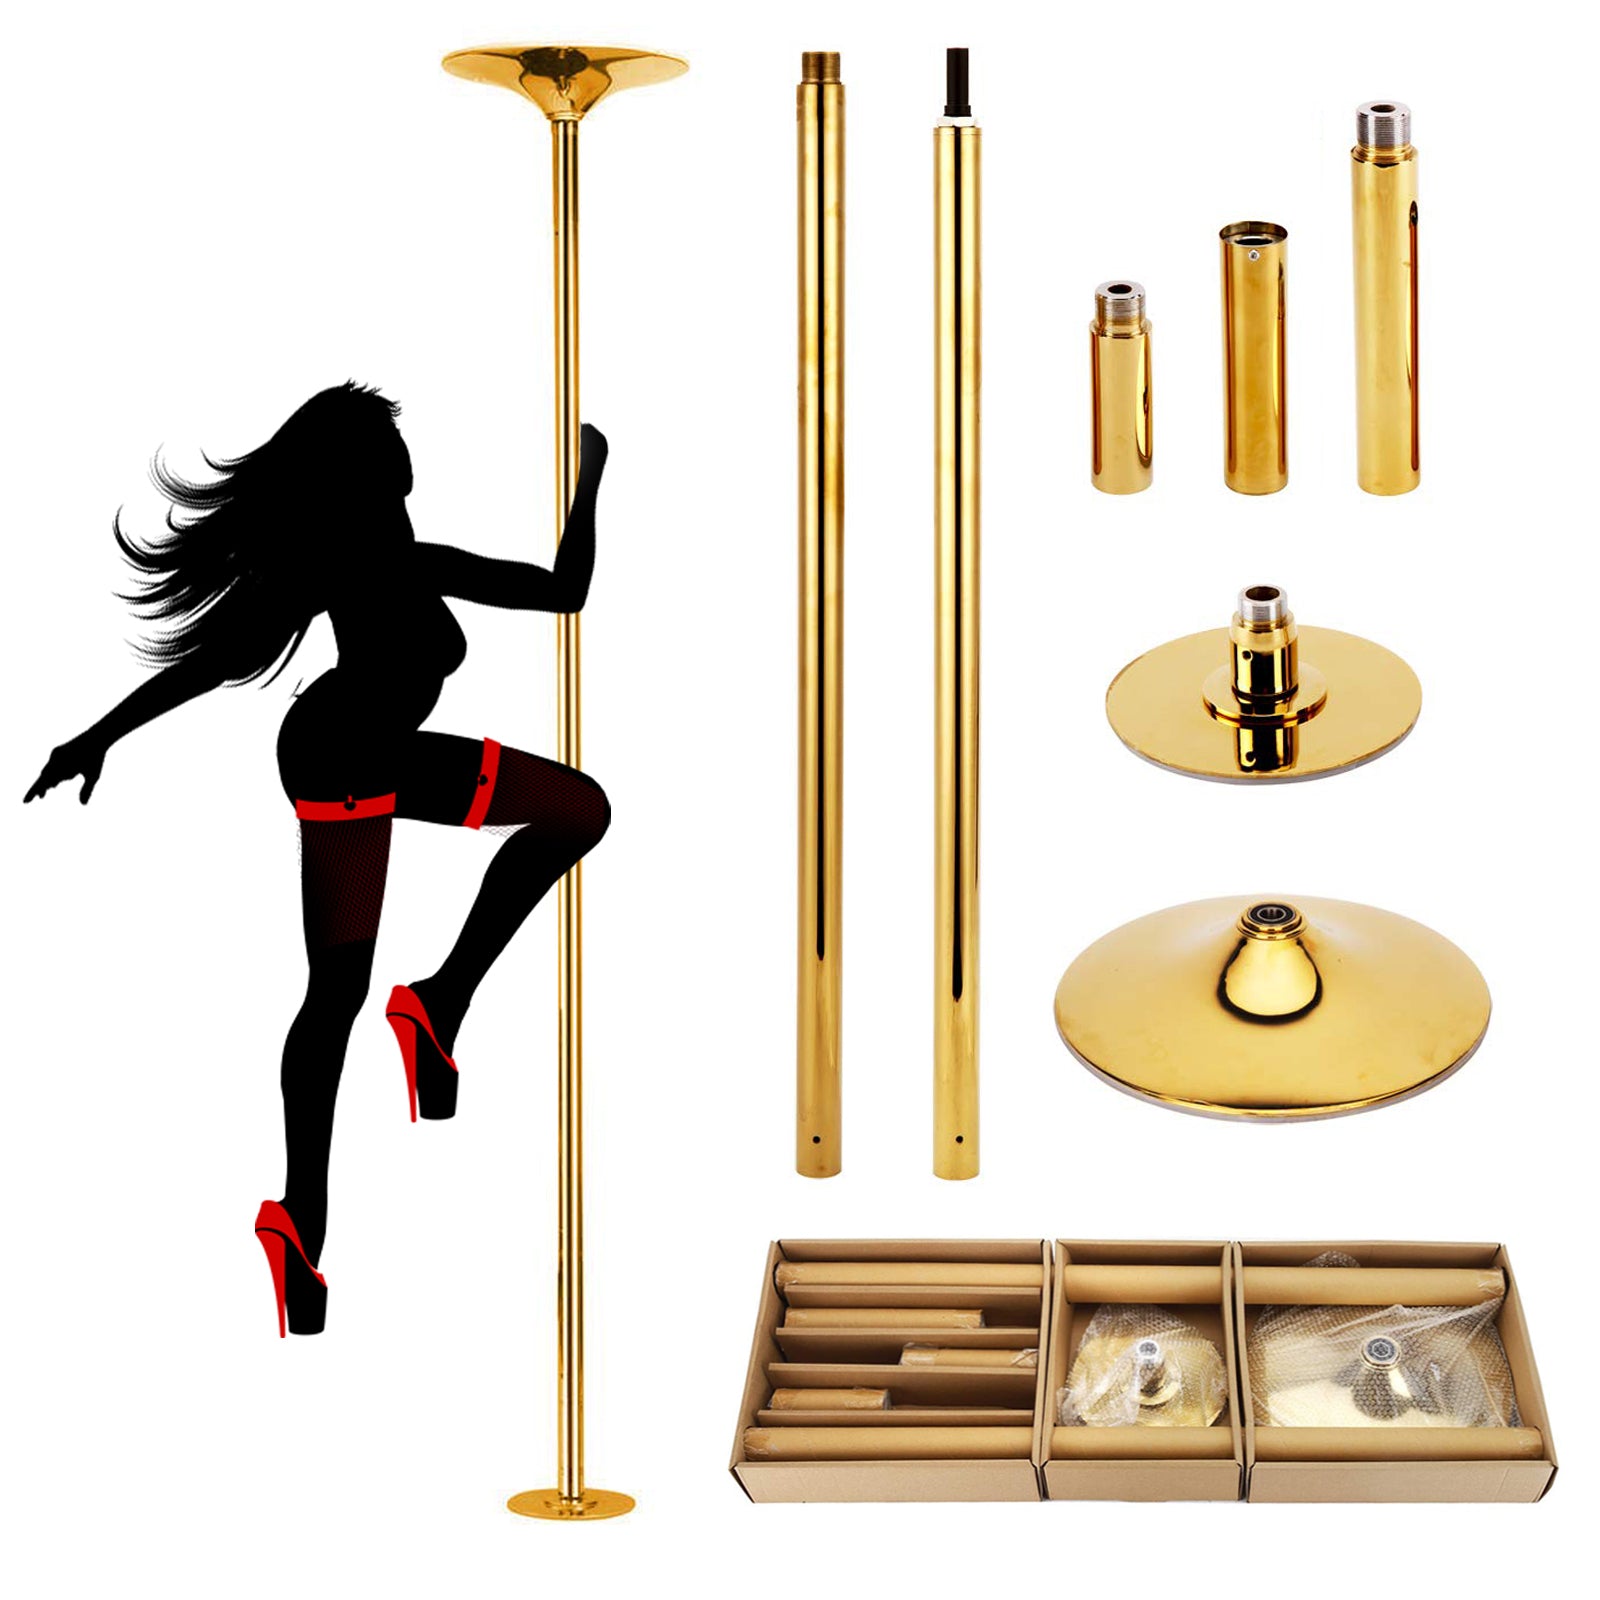 PRIORMAN Pole Dance Fixed Plange Plate for Home, Ceiling